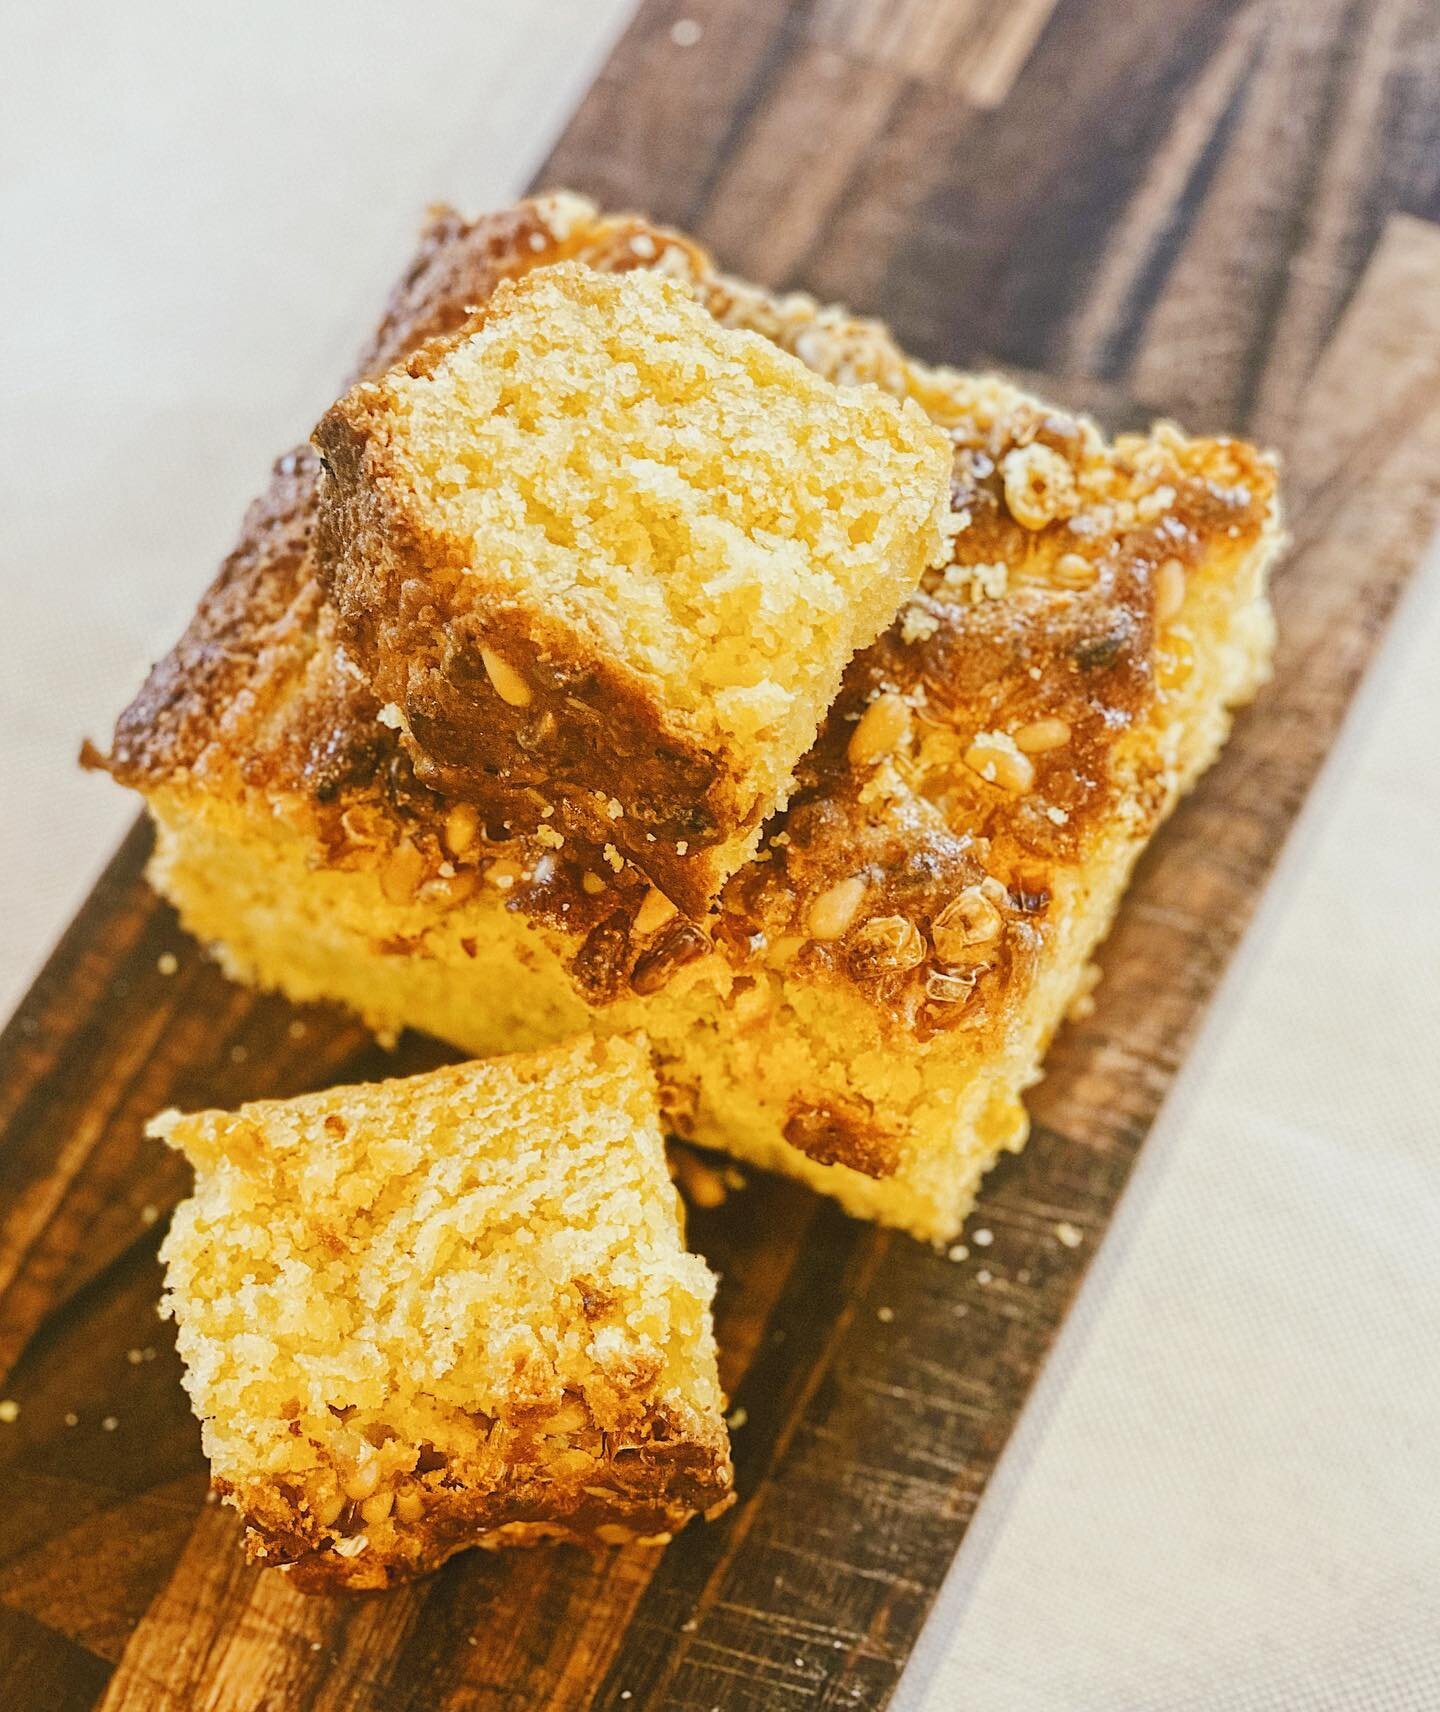 Our pine nut polenta bread - Radici&rsquo;s Italian twist on cornbread. Happy Thanksgiving from everyone here! 🦃🍂

.
.
.
.
.
.
#thanksgiving #italian #radici #dc #dceats #capitolhill #easternmarket #smallbusiness #supportsmallbusiness